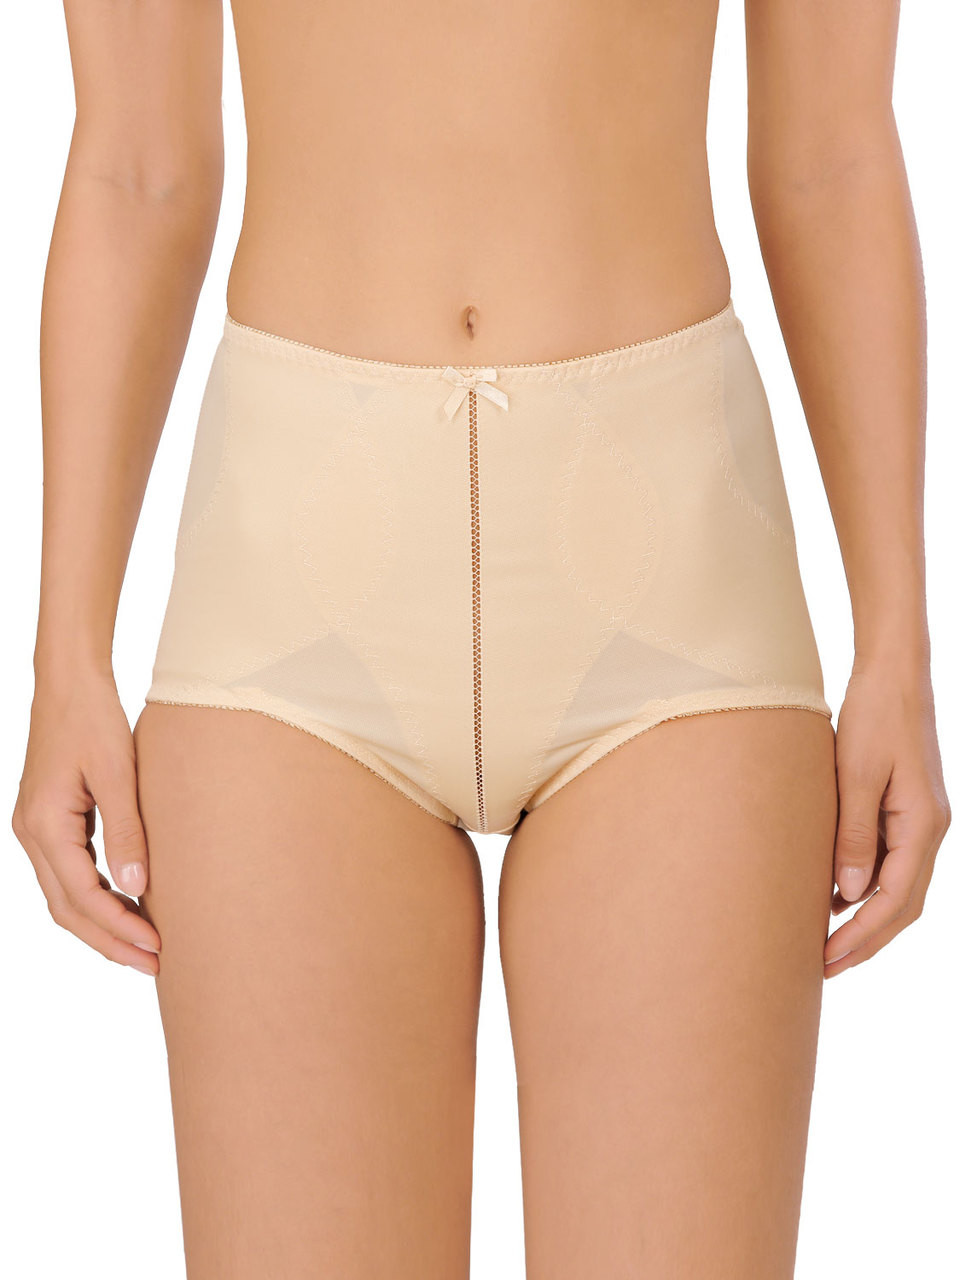 🧜🏽‍♀️ Serena - seamless girdle without rods Finally Available